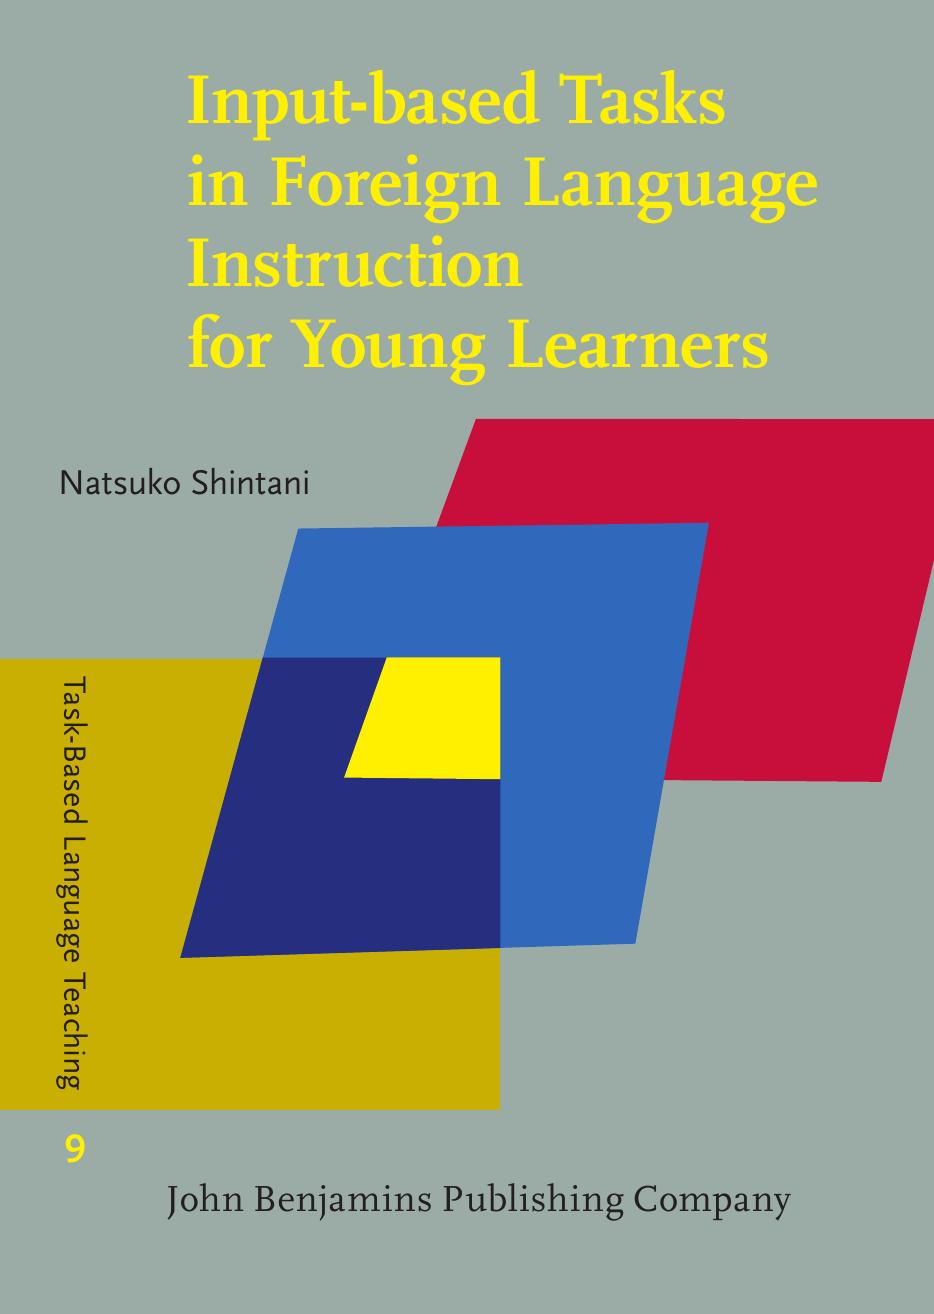 Input-based Tasks in Foreign Language Instruction for Young Learners by Natsuko Shintani